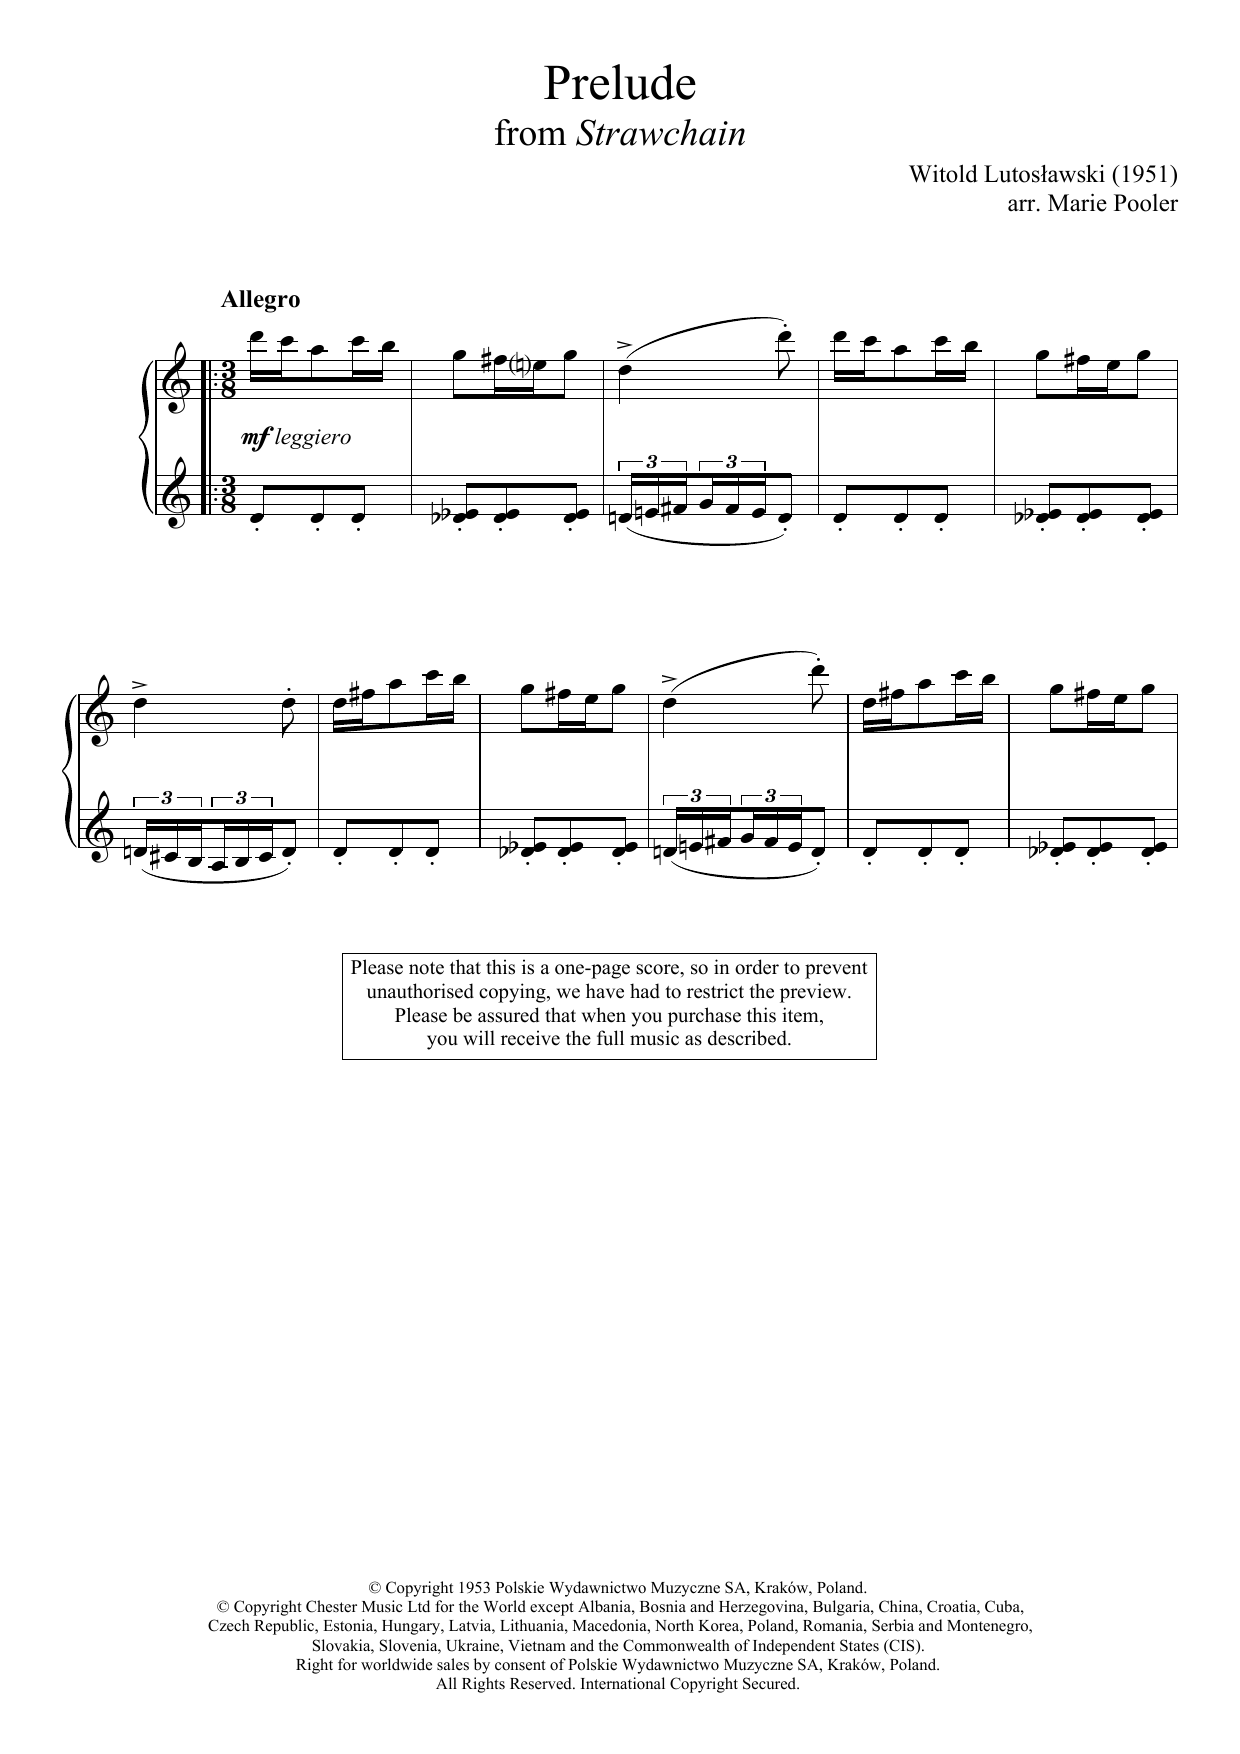 Download Witold Lutoslawski Prelude (from 'Strawchain') Sheet Music